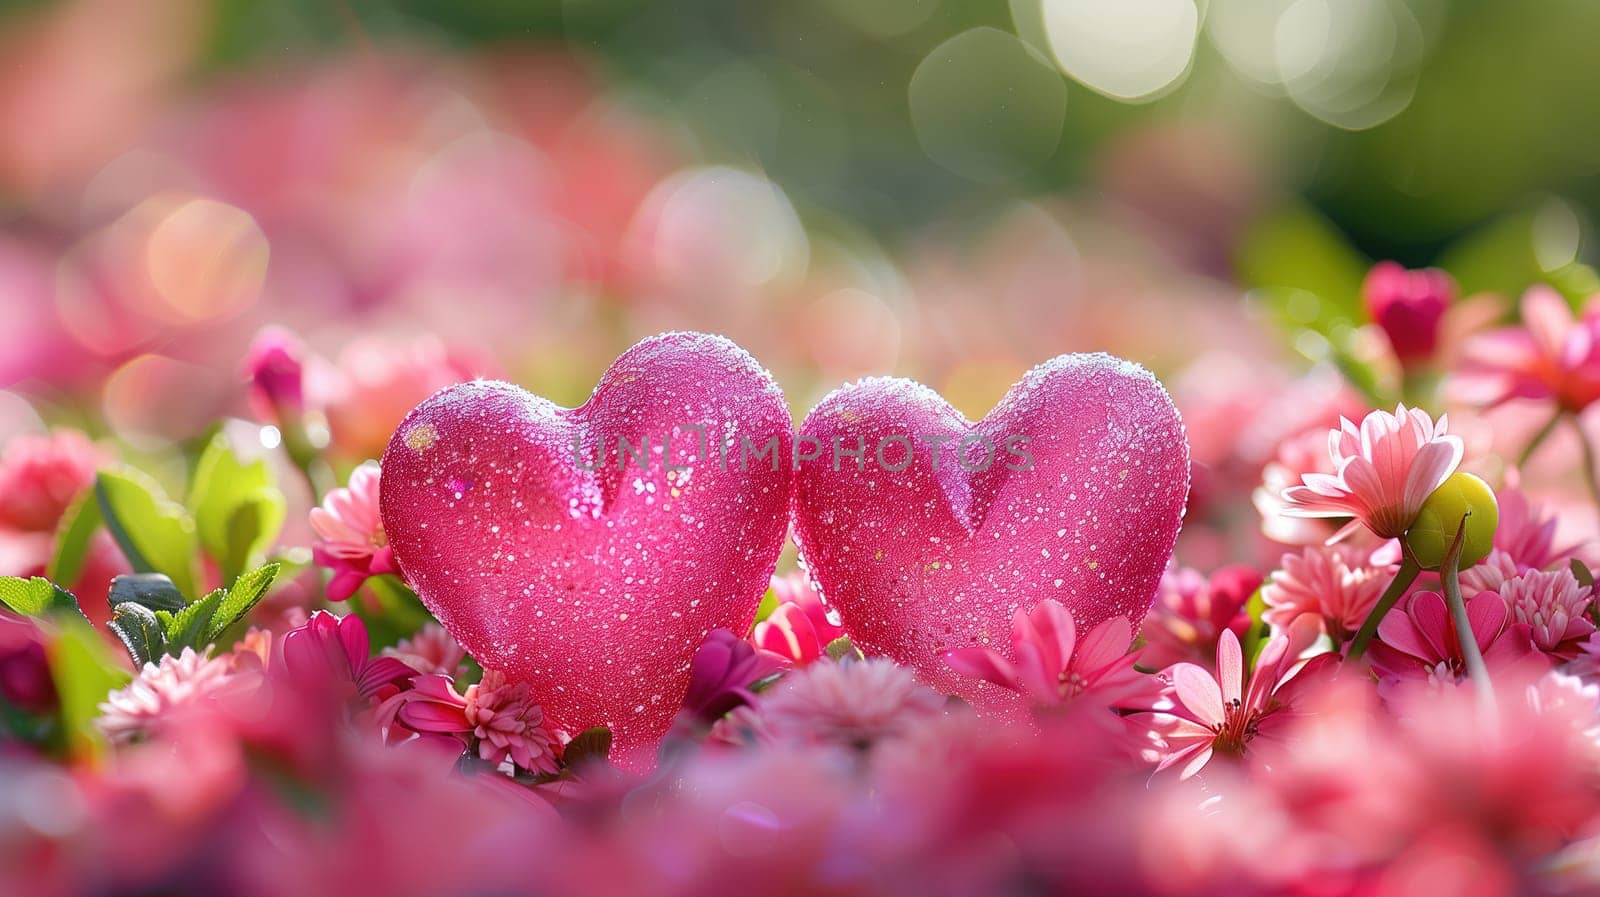 Two Pink Hearts Among Field of Flowers by TRMK